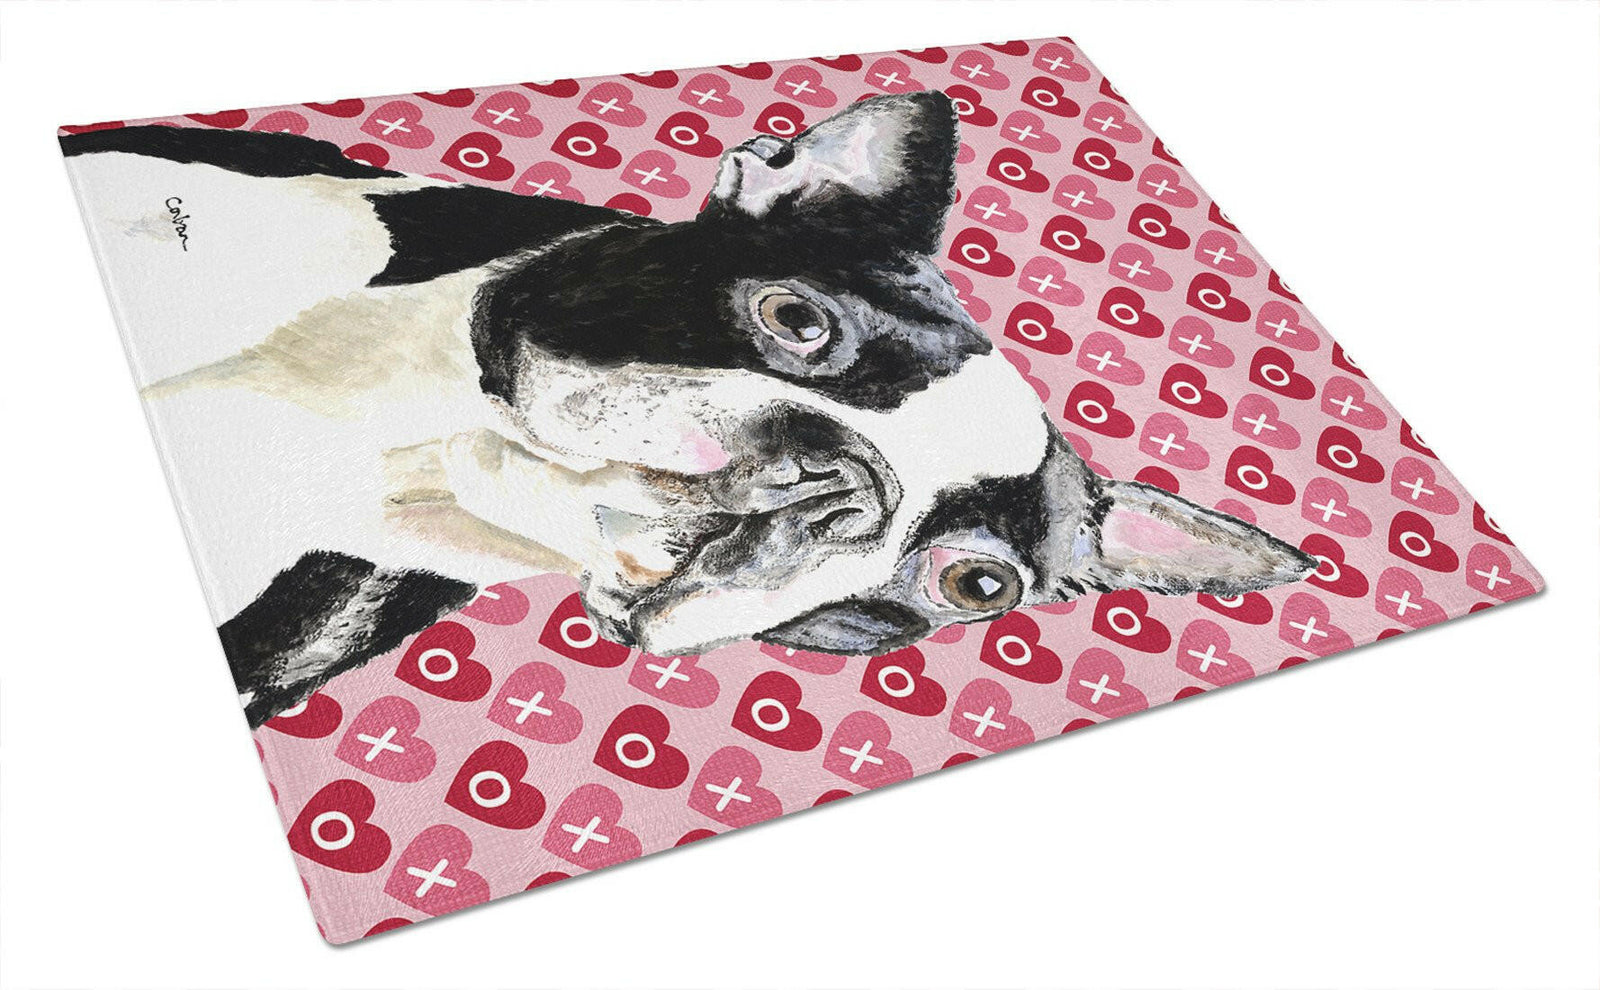 Boston Terrier Hearts Love and Valentine's Day Glass Cutting Board Large by Caroline's Treasures